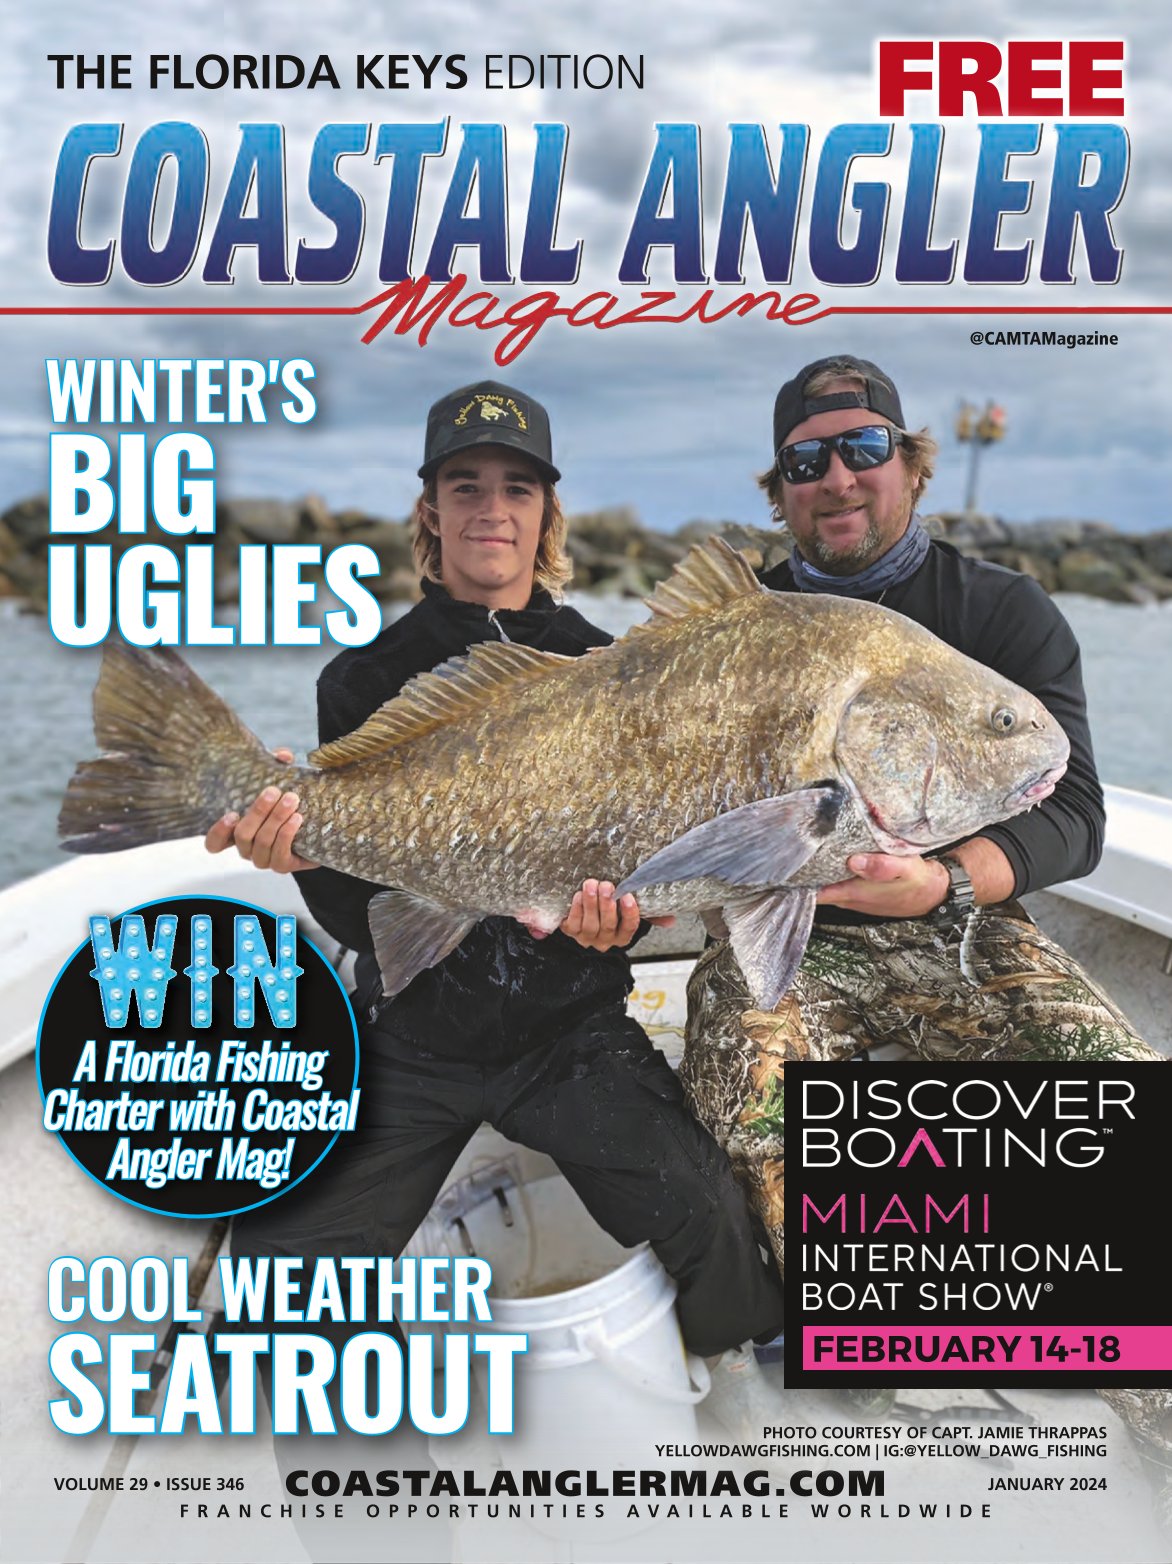 January 2024 Coastal Angler Magazine article written by Captain Quinlyn Haddon